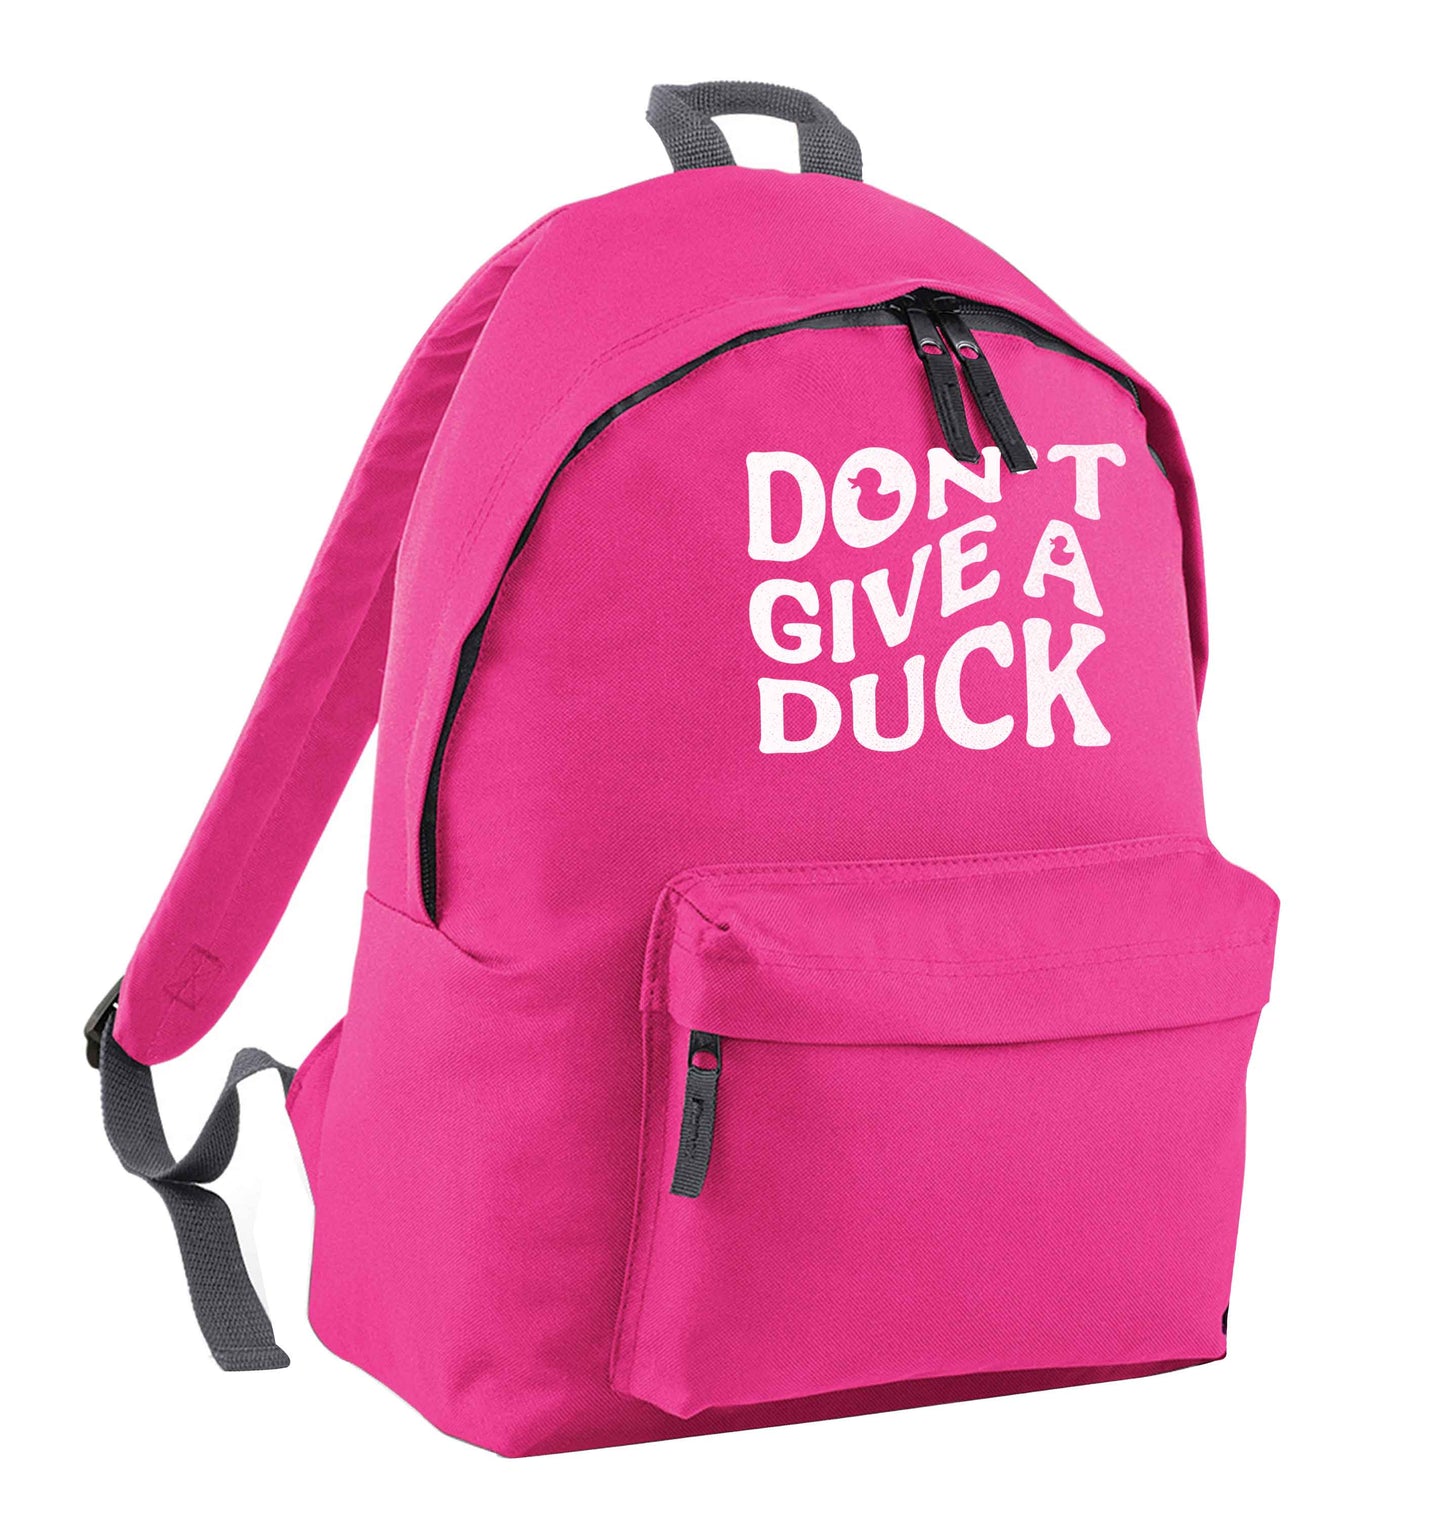 Don't give a duck pink adults backpack